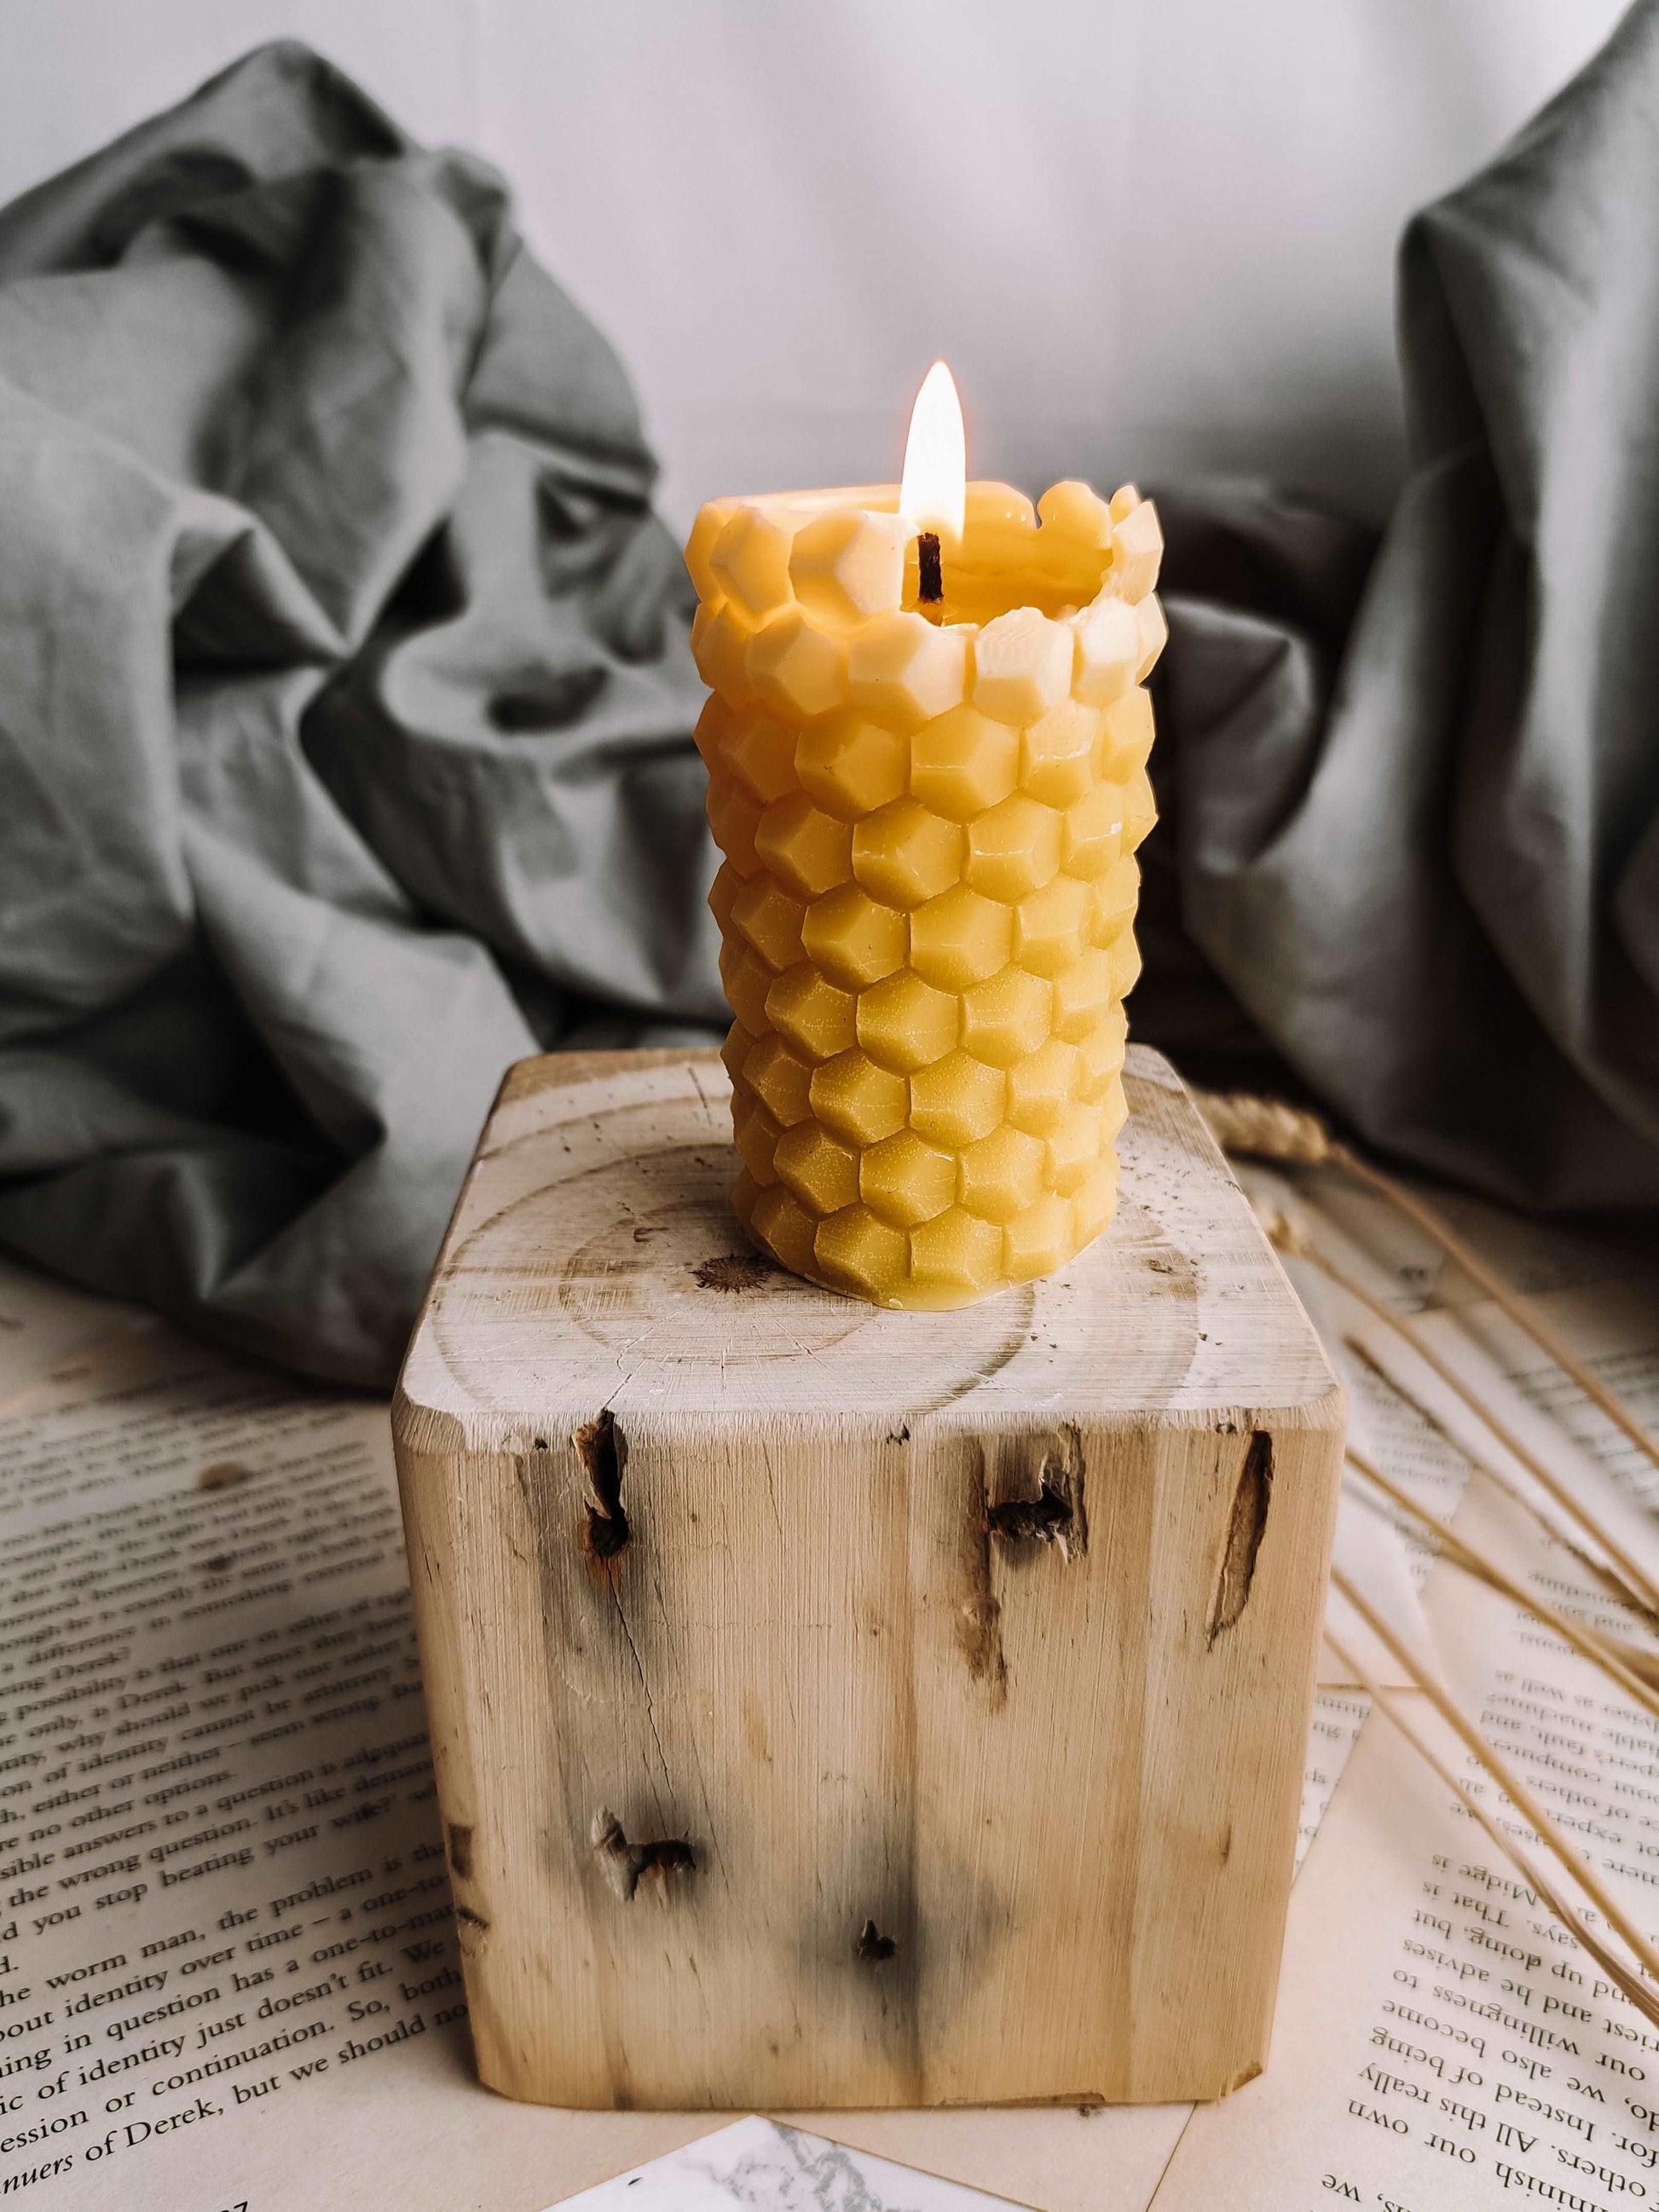 Honeycomb Solid Pure Beeswax Candle, Honey Bee, bee hive candles, Decorative Candles, autumn decor